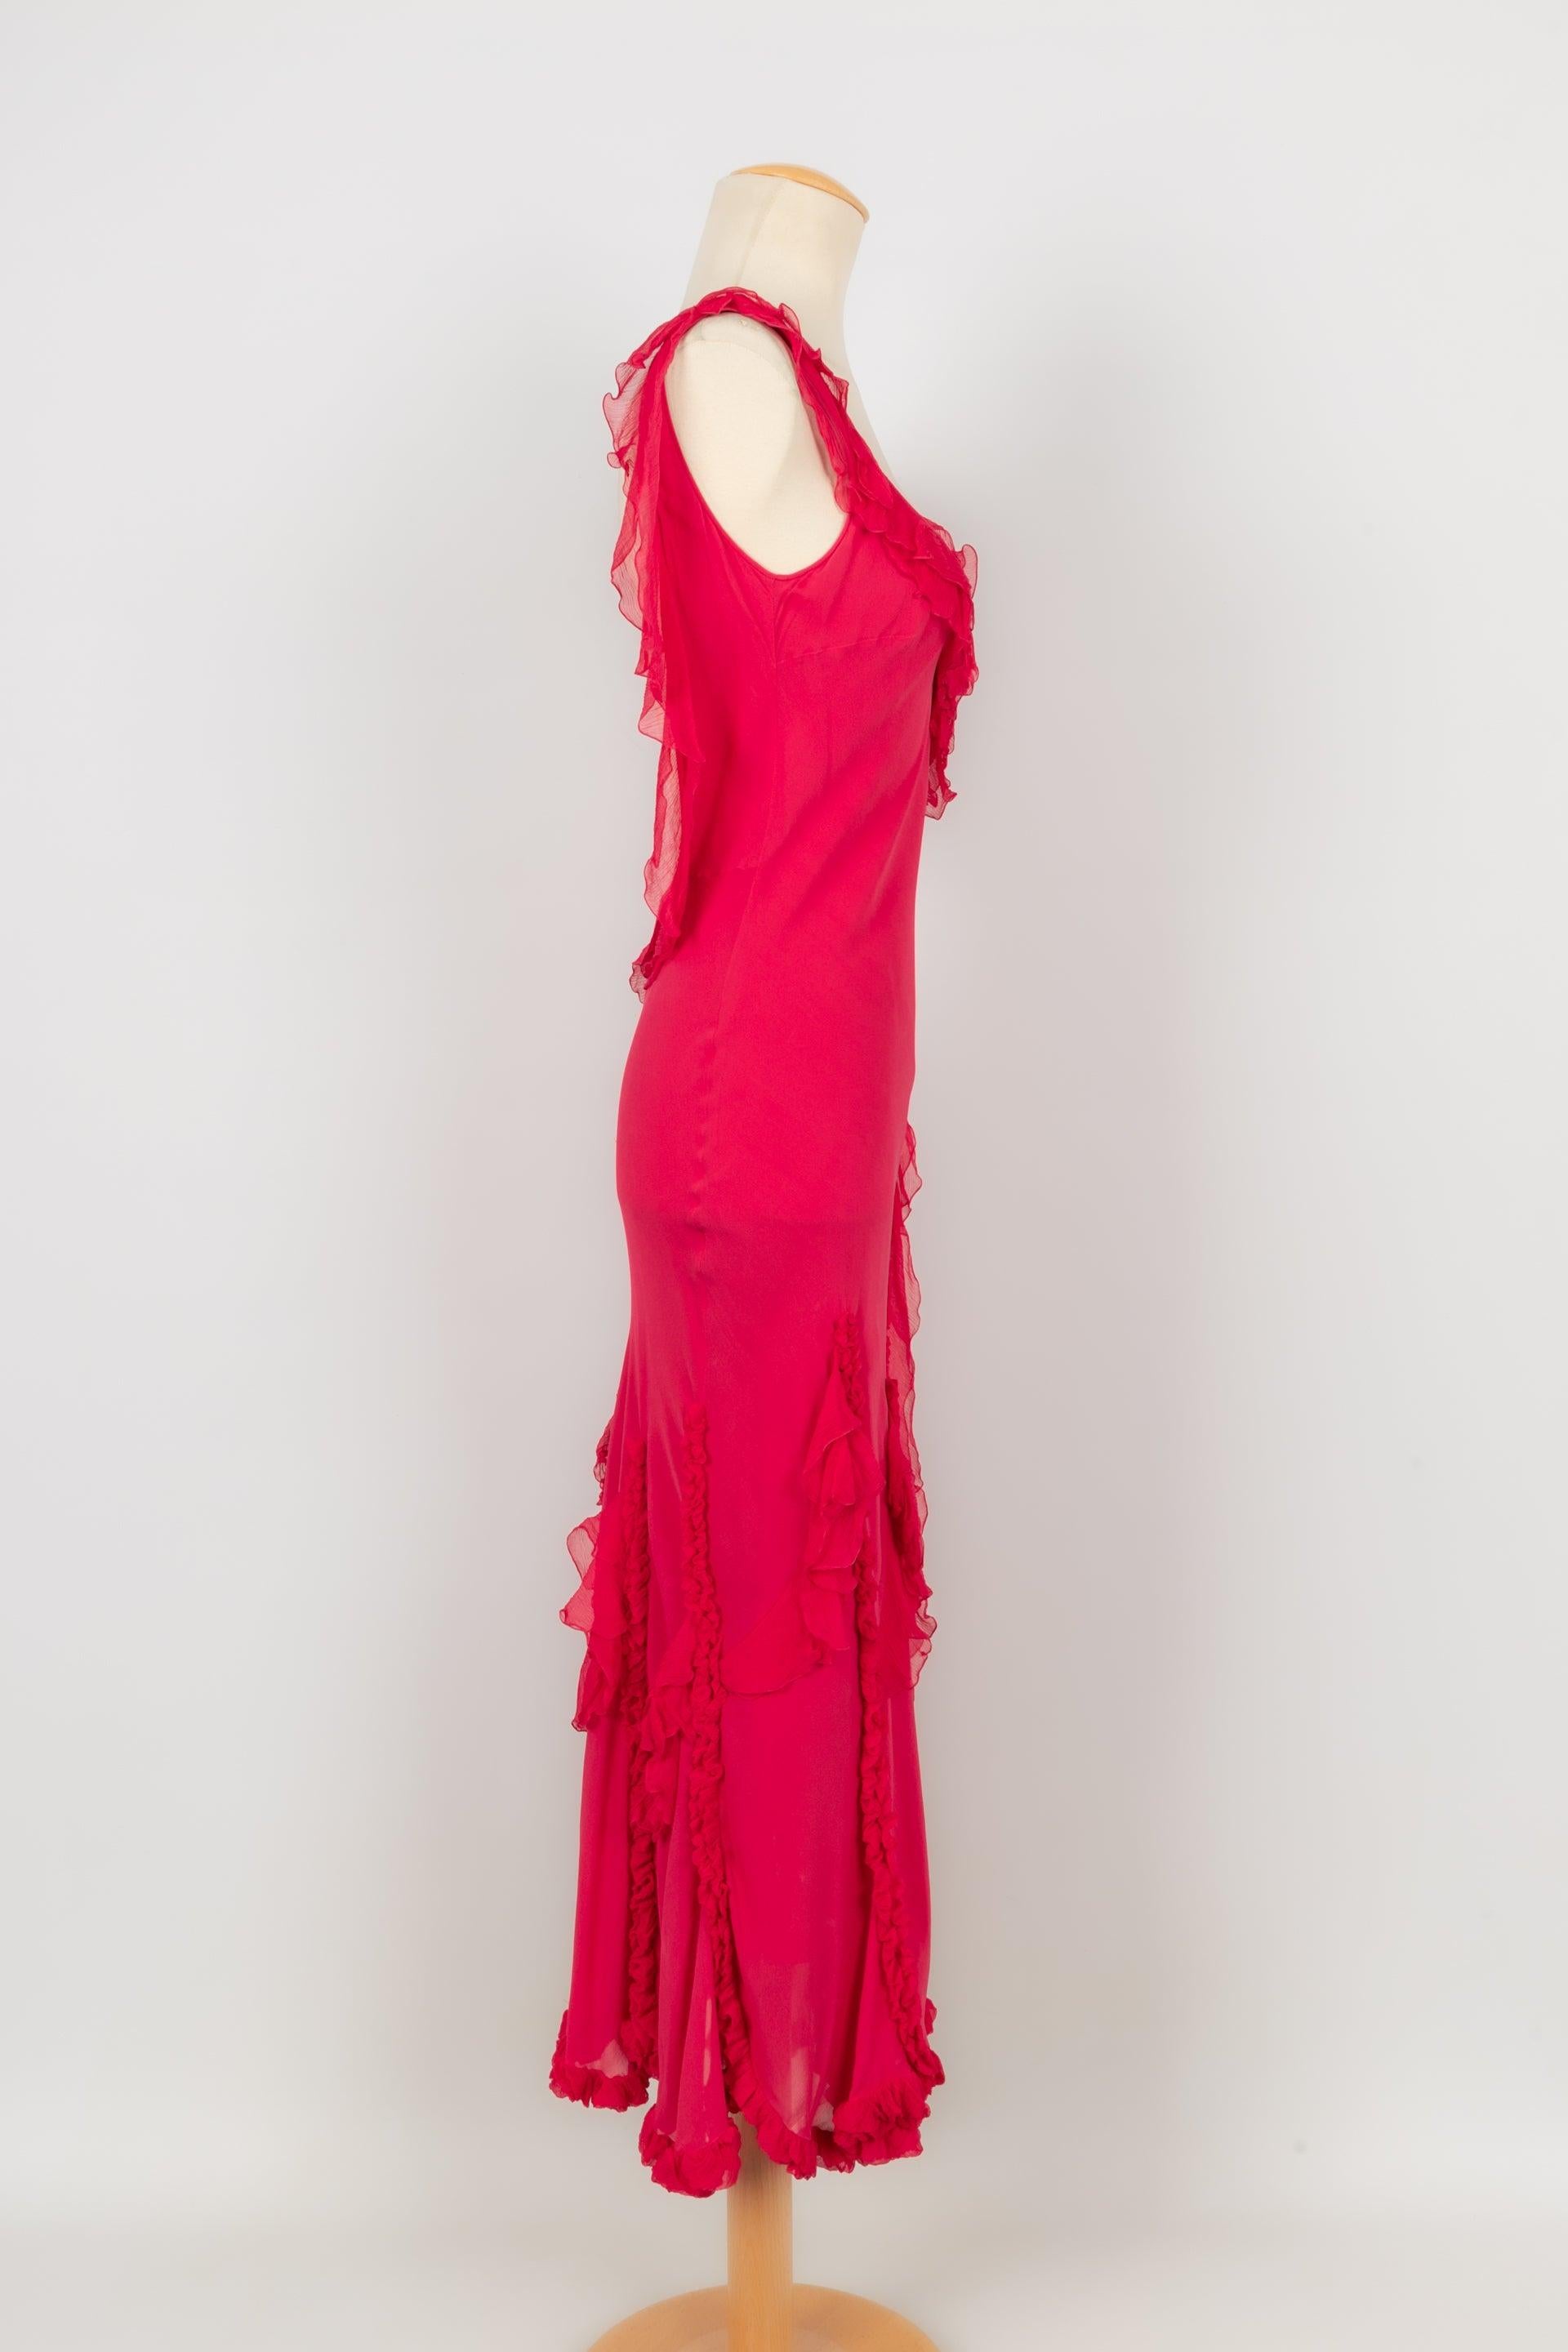 Galliano Silk Muslin and Silk Long Dress in Pink Tones In Excellent Condition For Sale In SAINT-OUEN-SUR-SEINE, FR